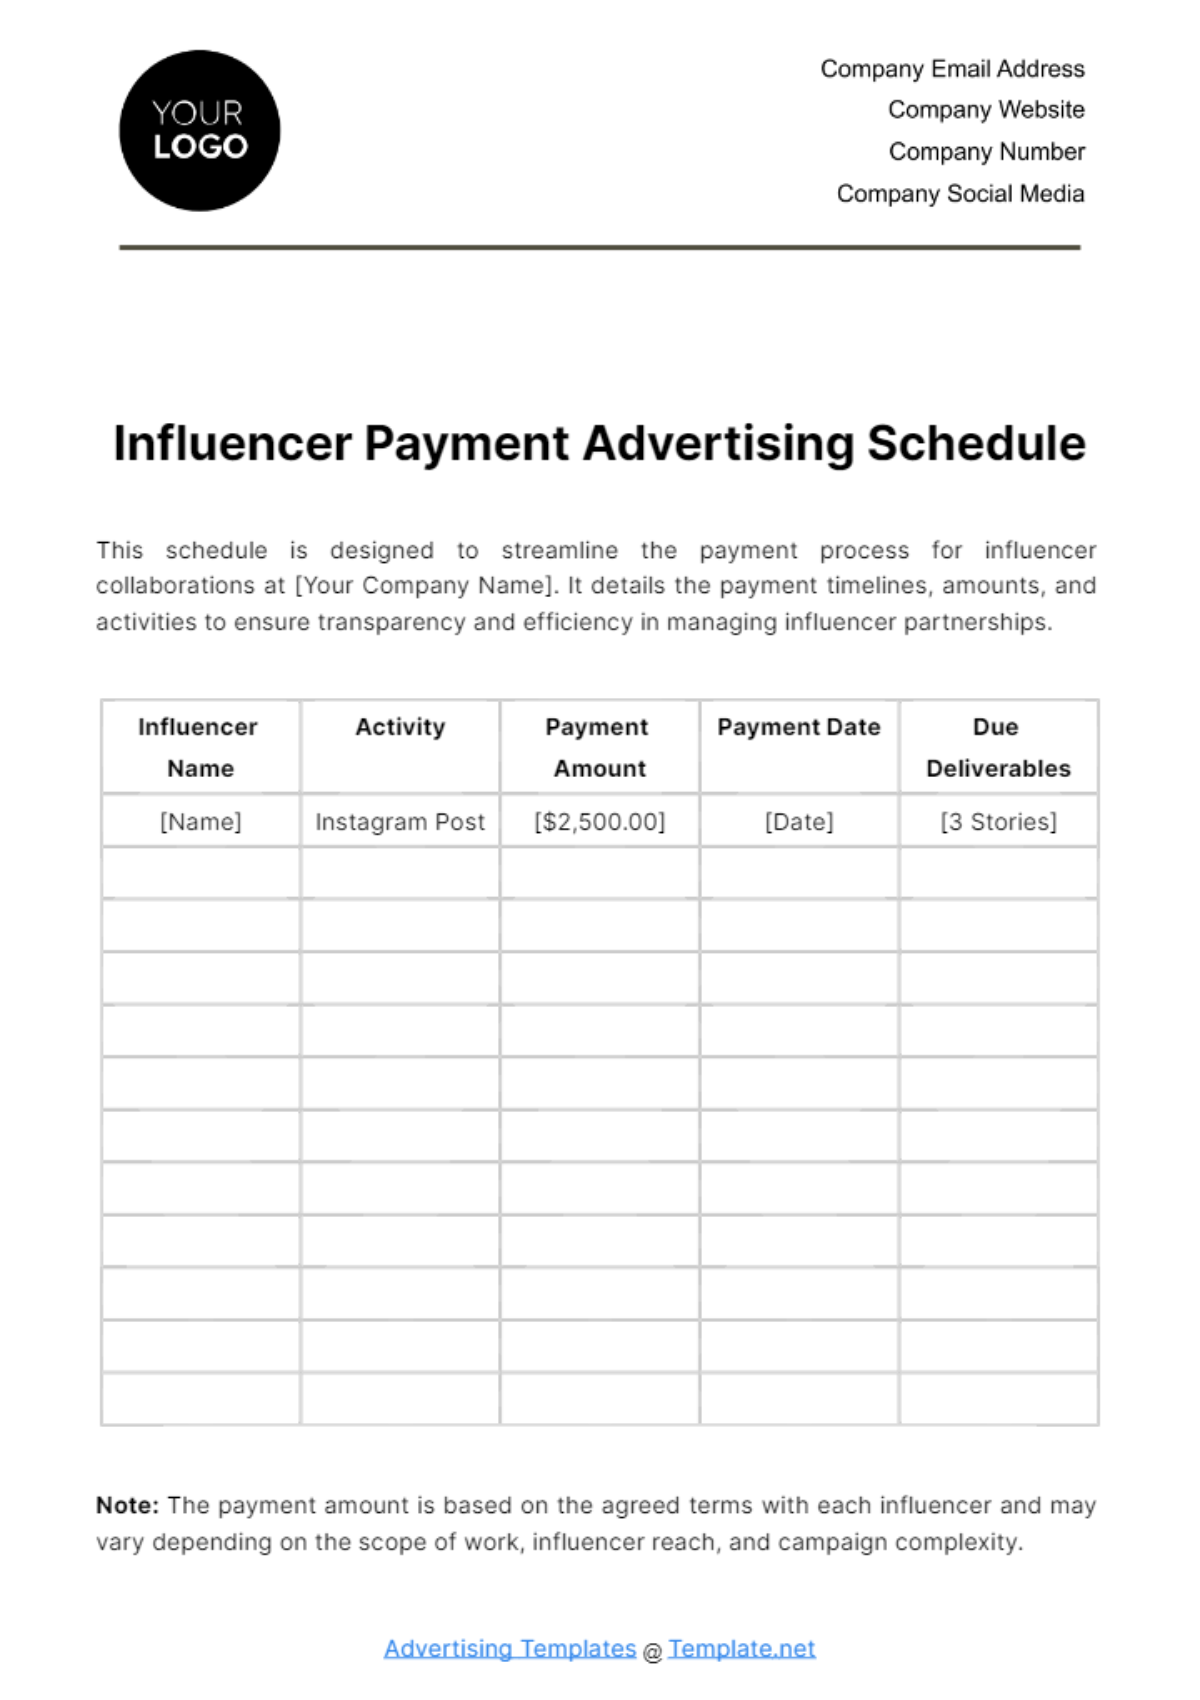 Influencer Payment Advertising Schedule Template